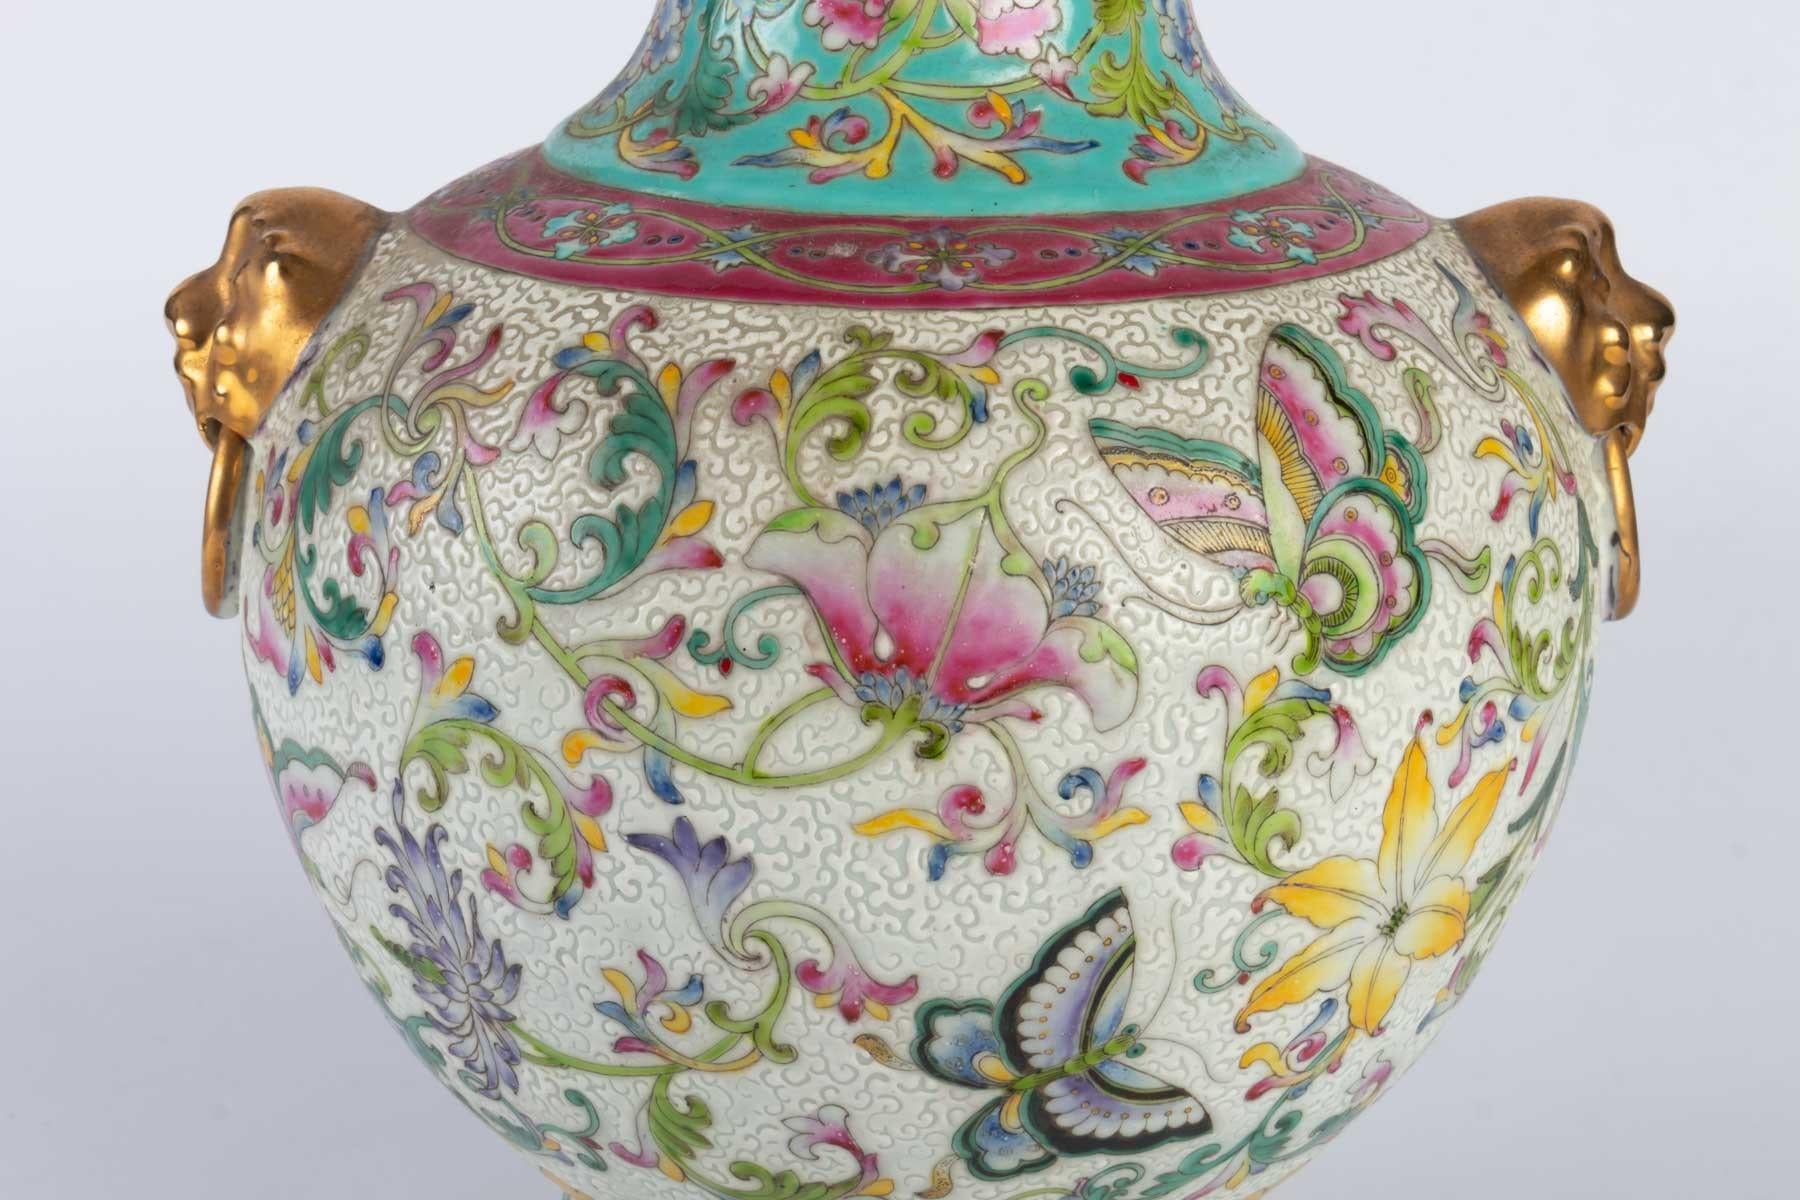 Chinese Porcelain Vase Decorated with Floral Scrolls